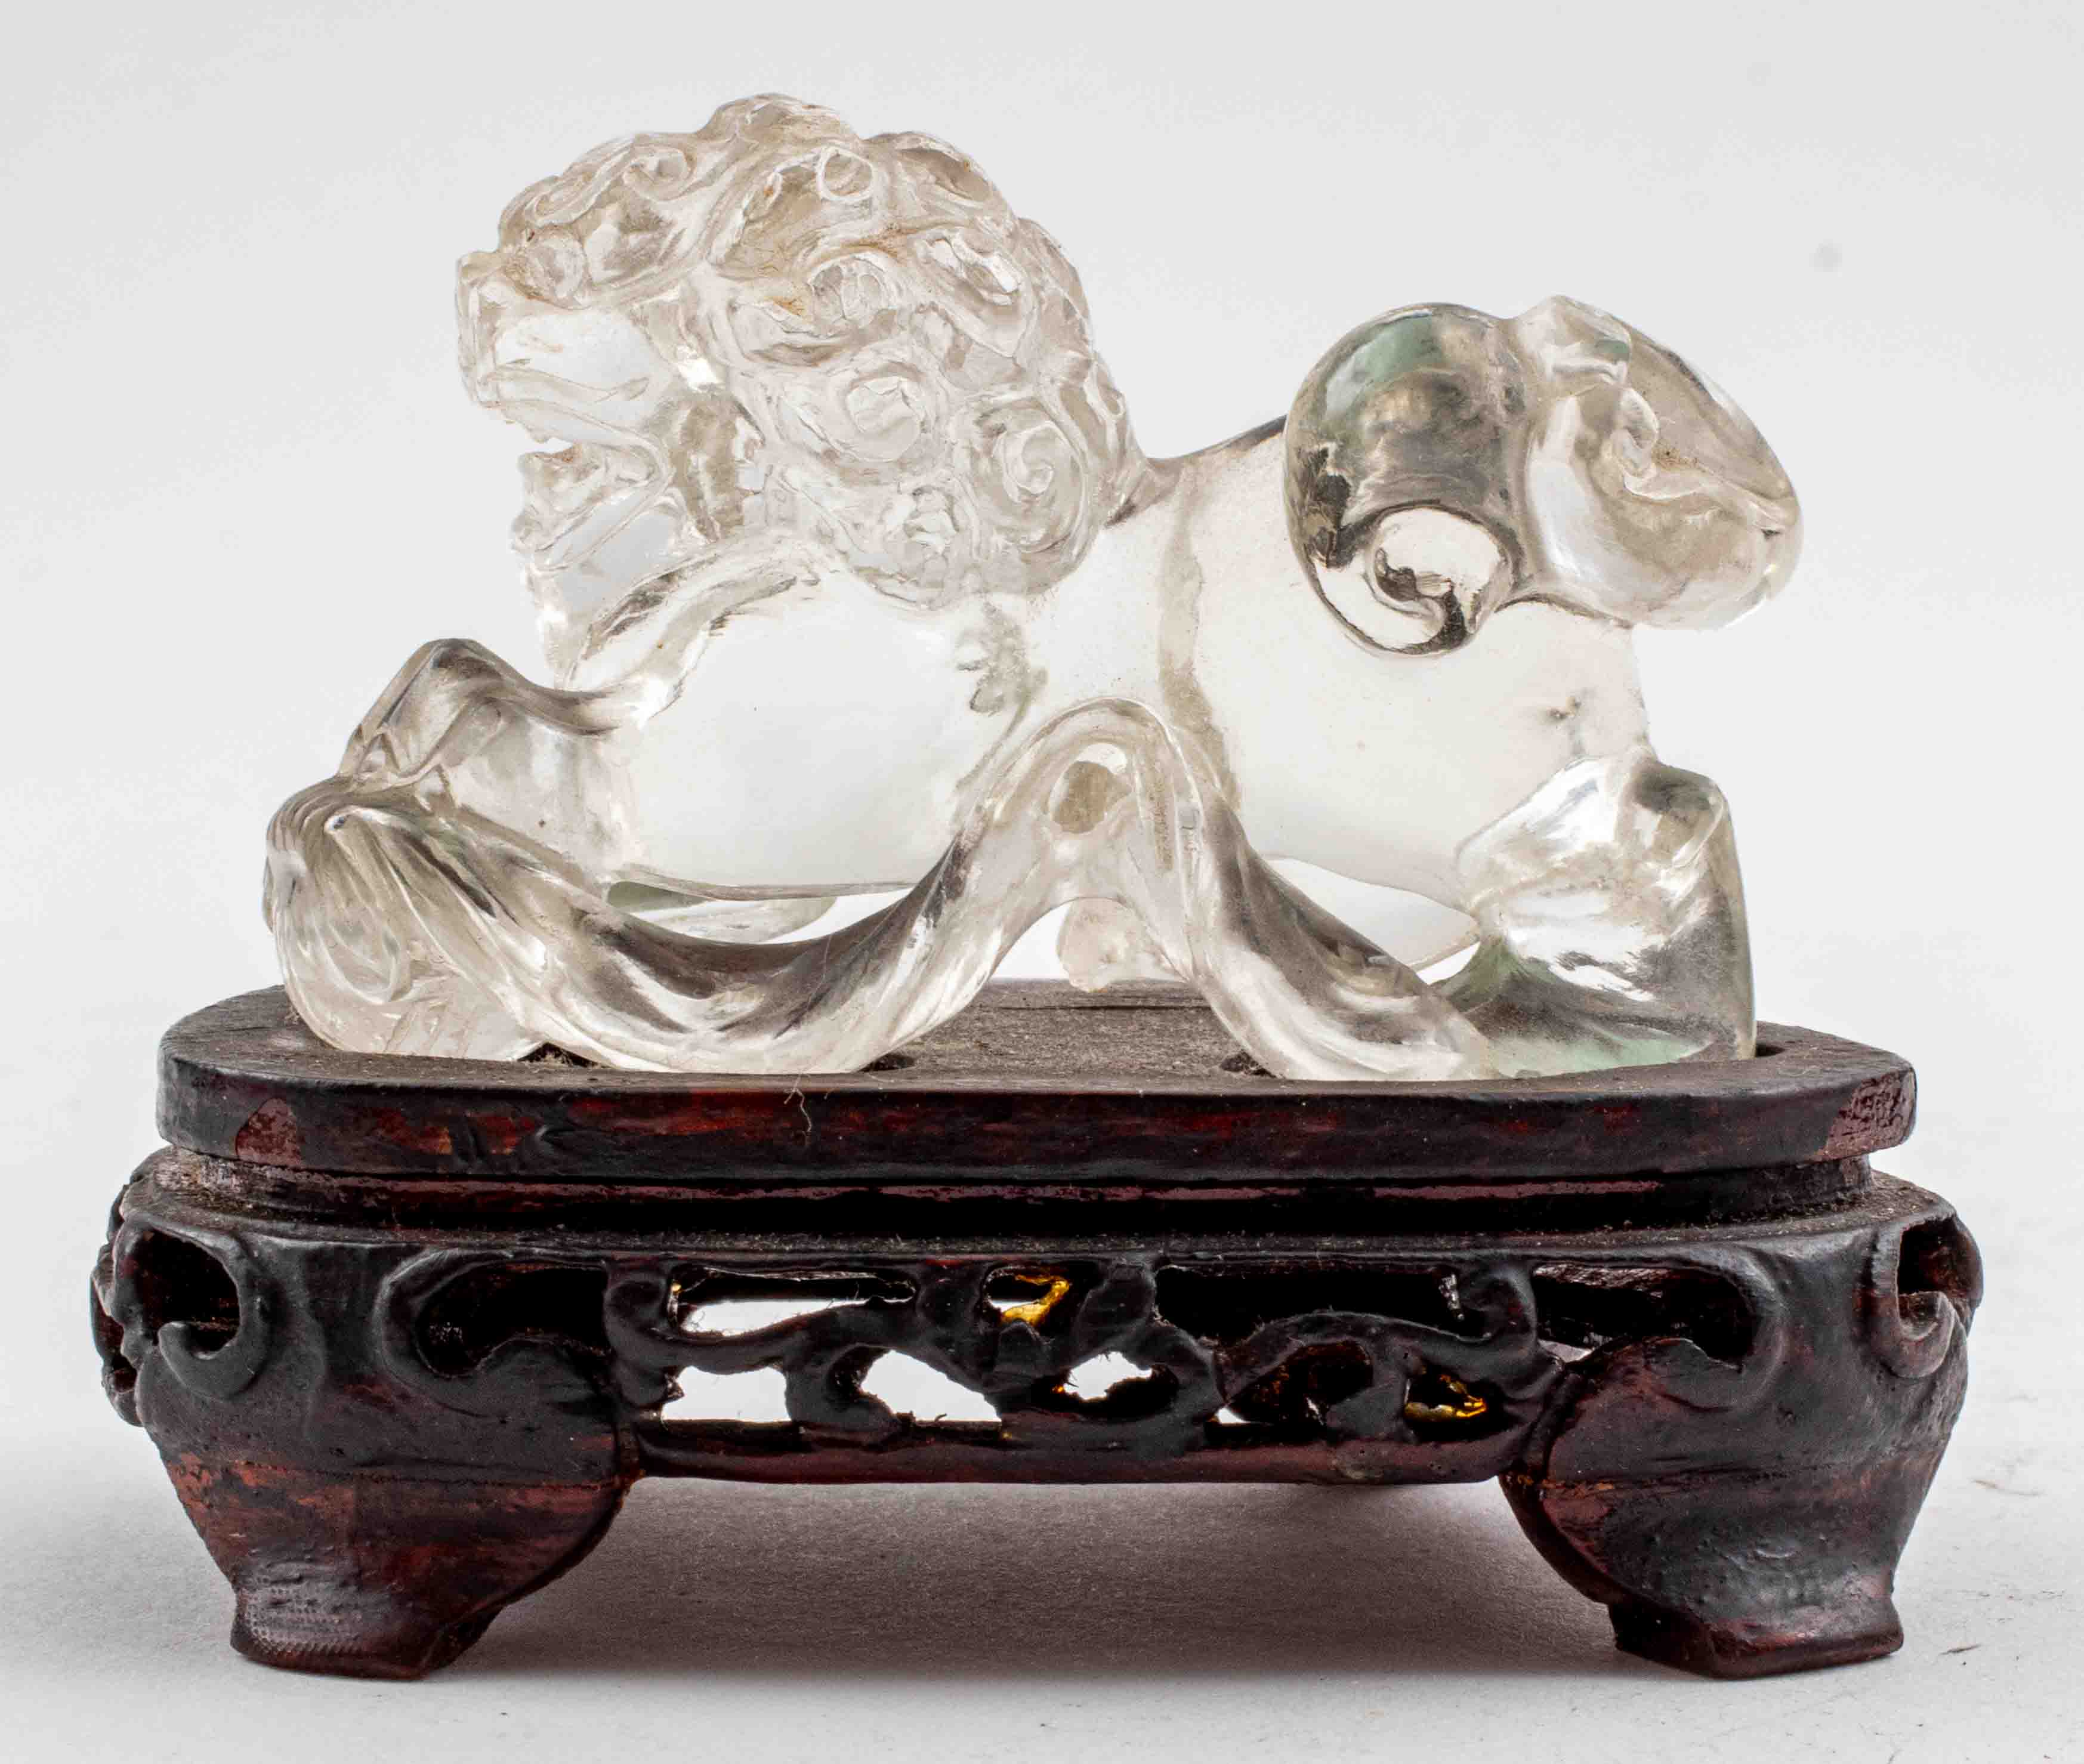 ASIAN ROCK CRYSTAL CARVING OF A